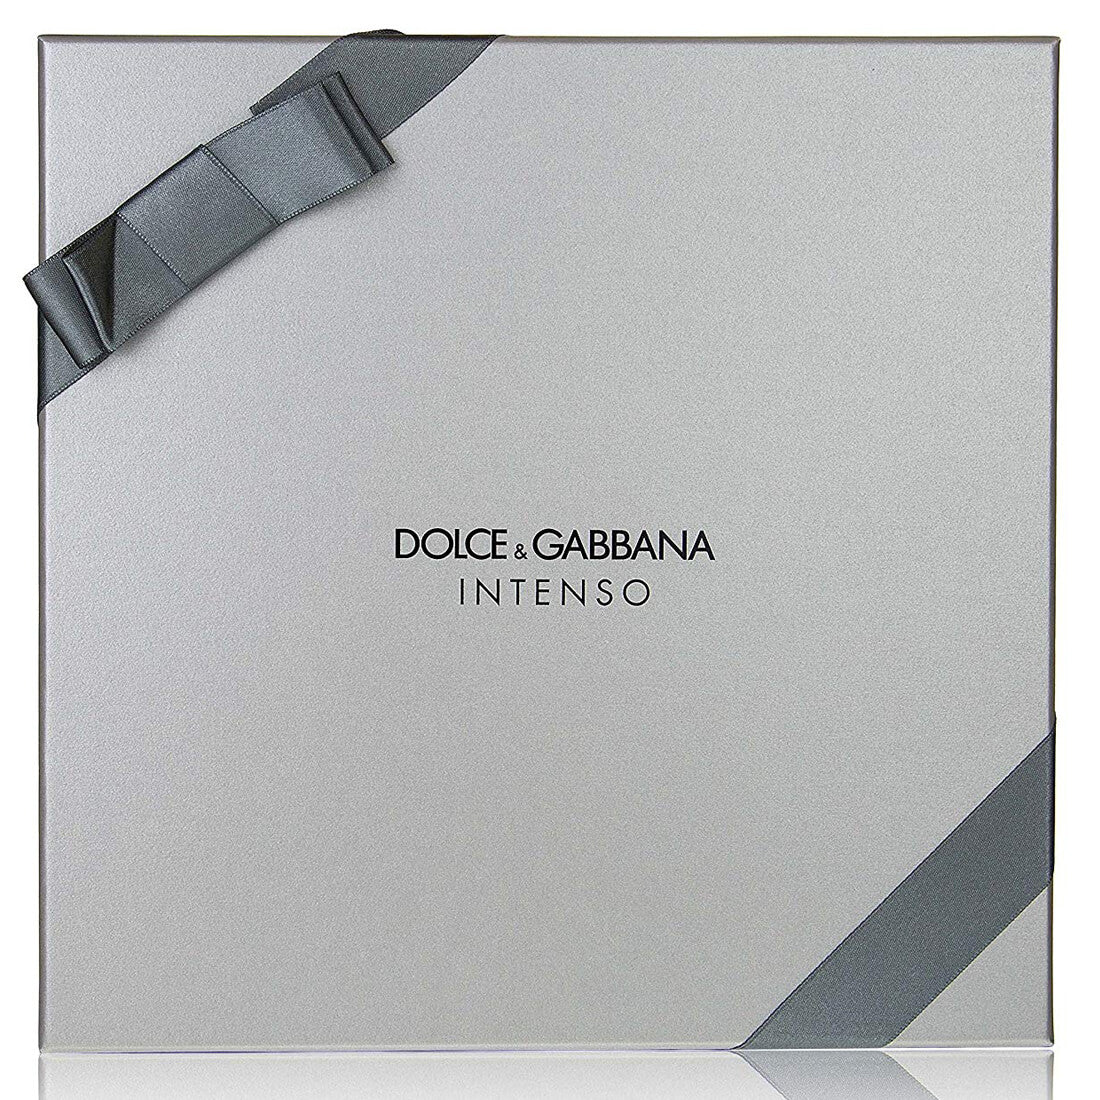 Dolce & Gabbana Intenso Pour Homme Gift Set